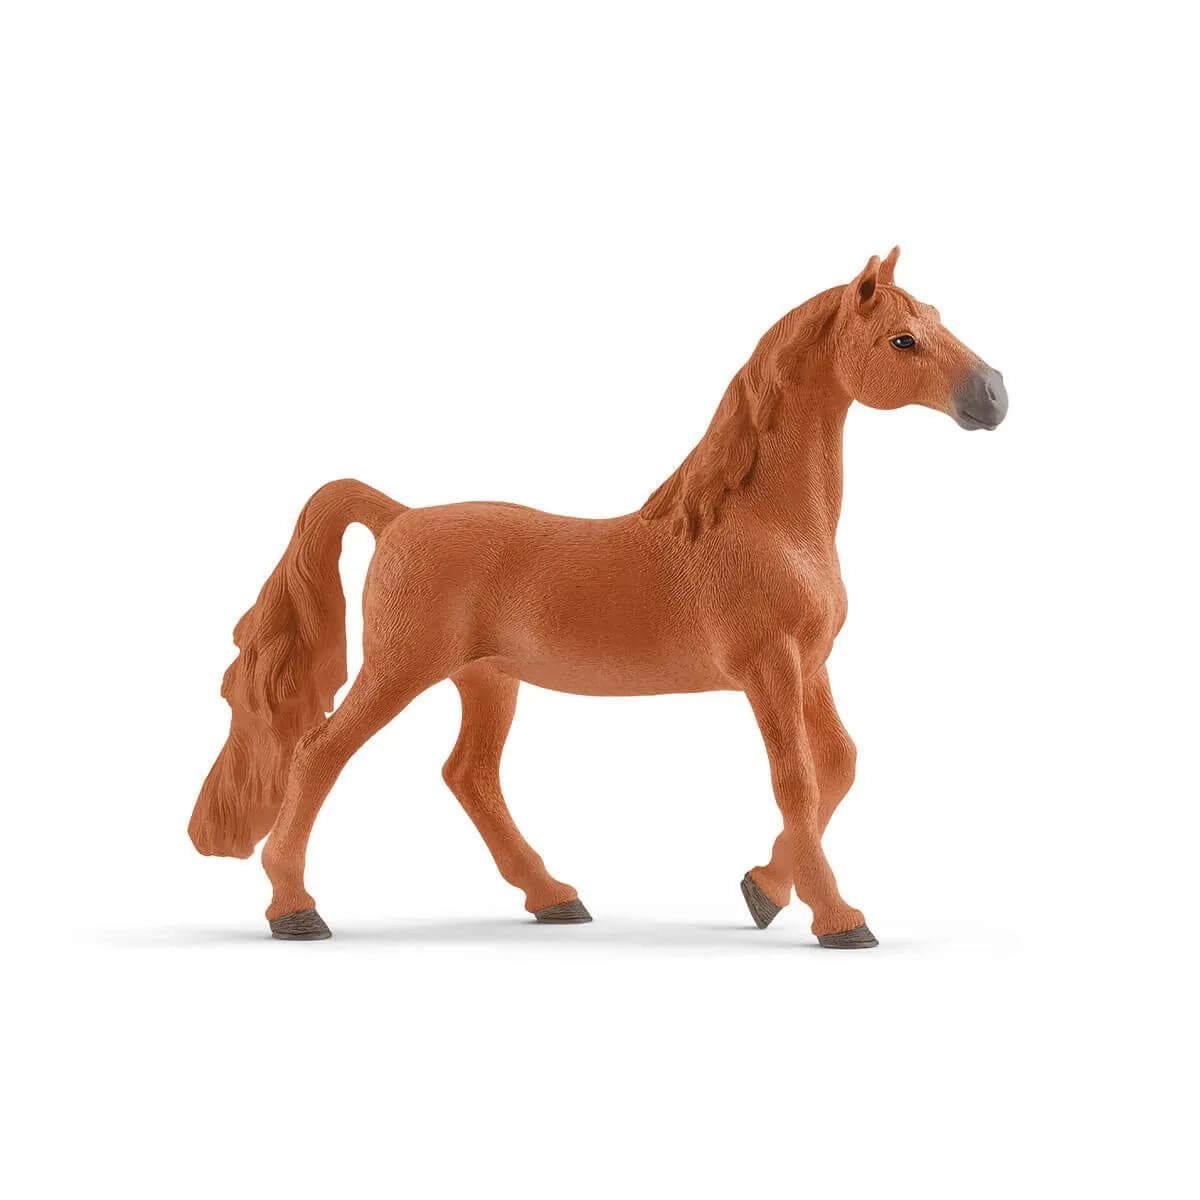 Schleich-American Saddlebred Mare-13912-Legacy Toys